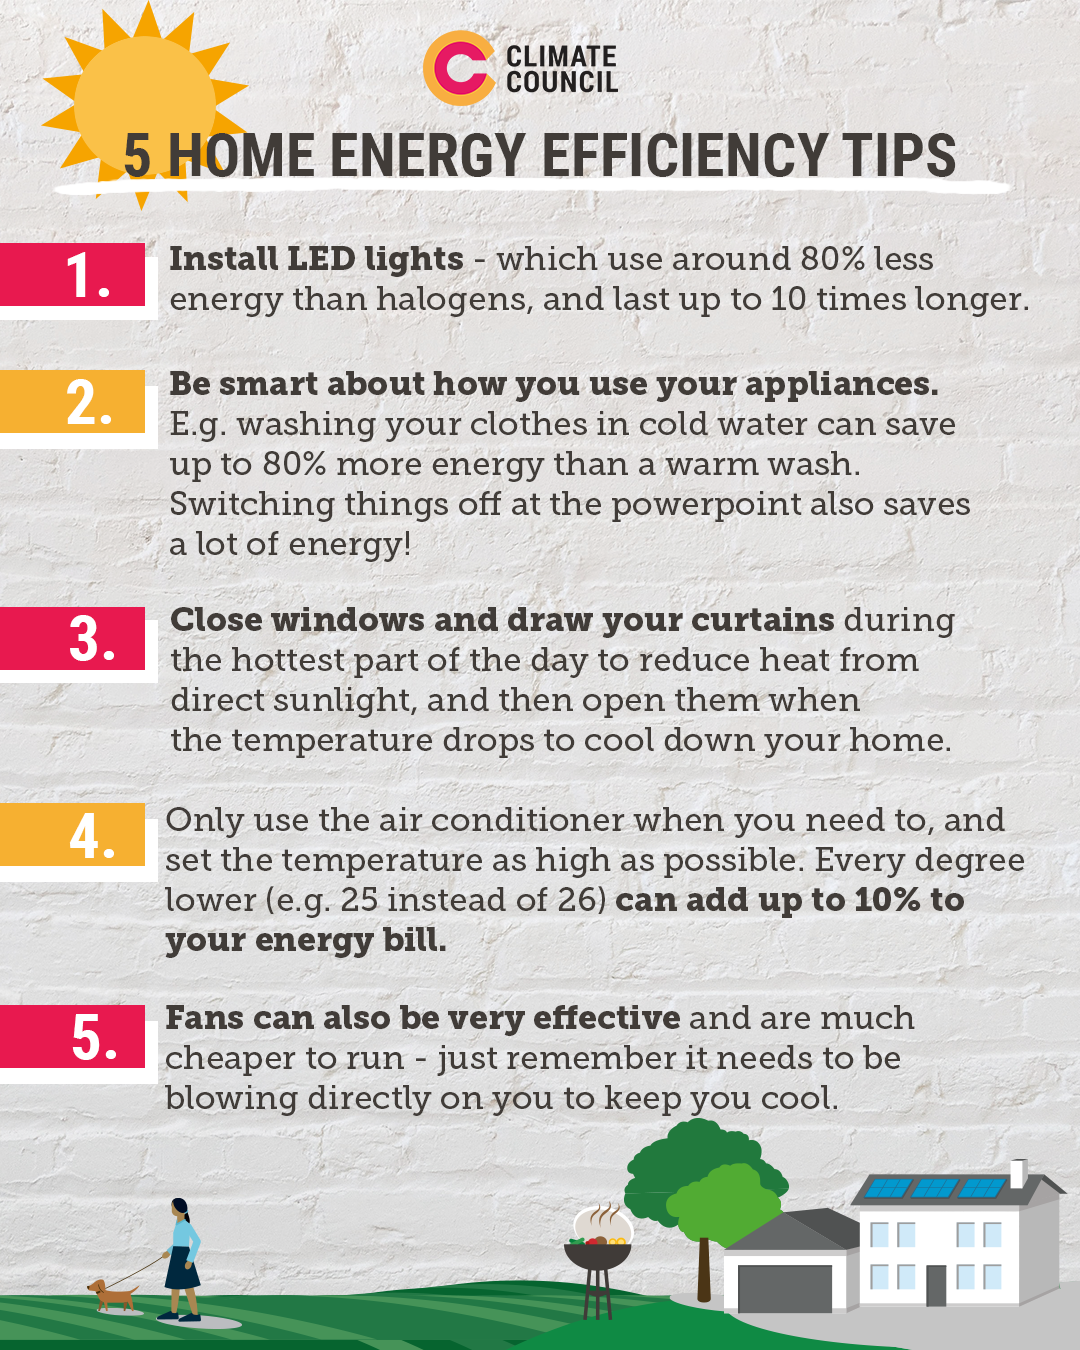 Top tips for improving you household energy efficiency in summer.